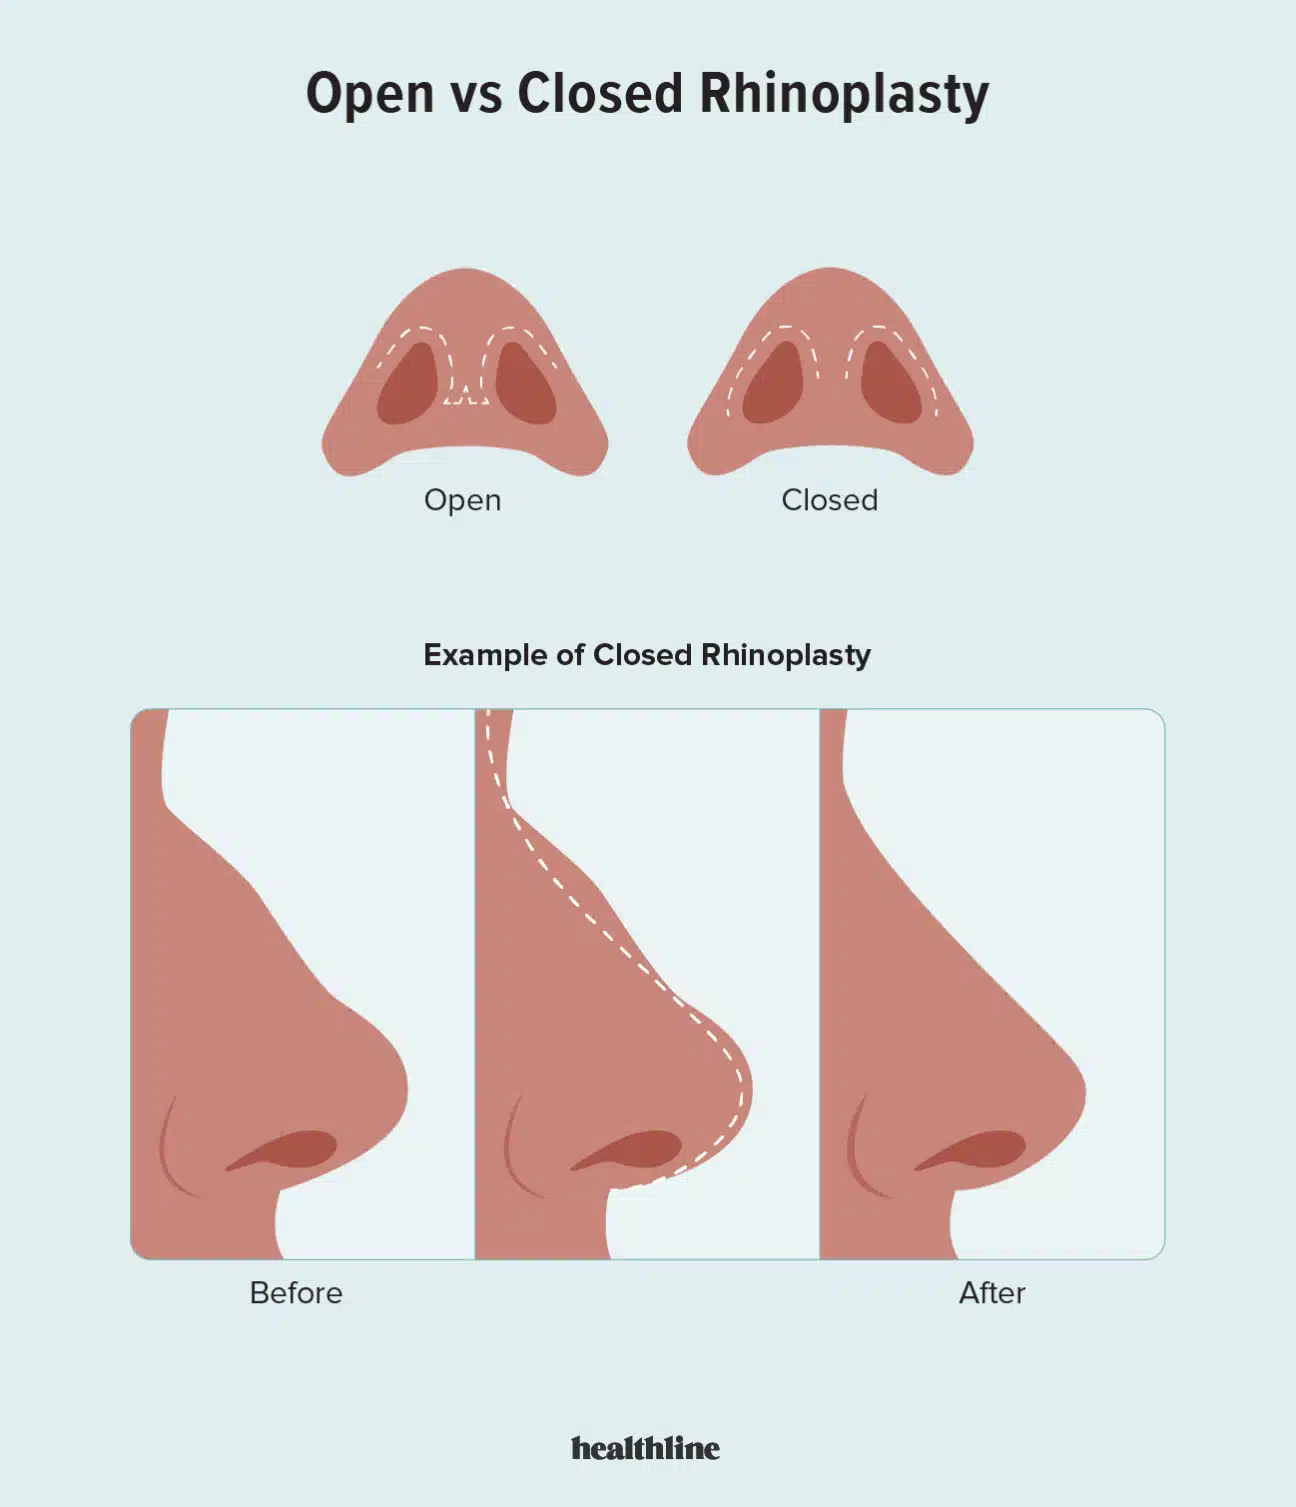 While all surgical procedures have inherent risks, some parts of rhinoplasty are more delicate and have higher associated risks.